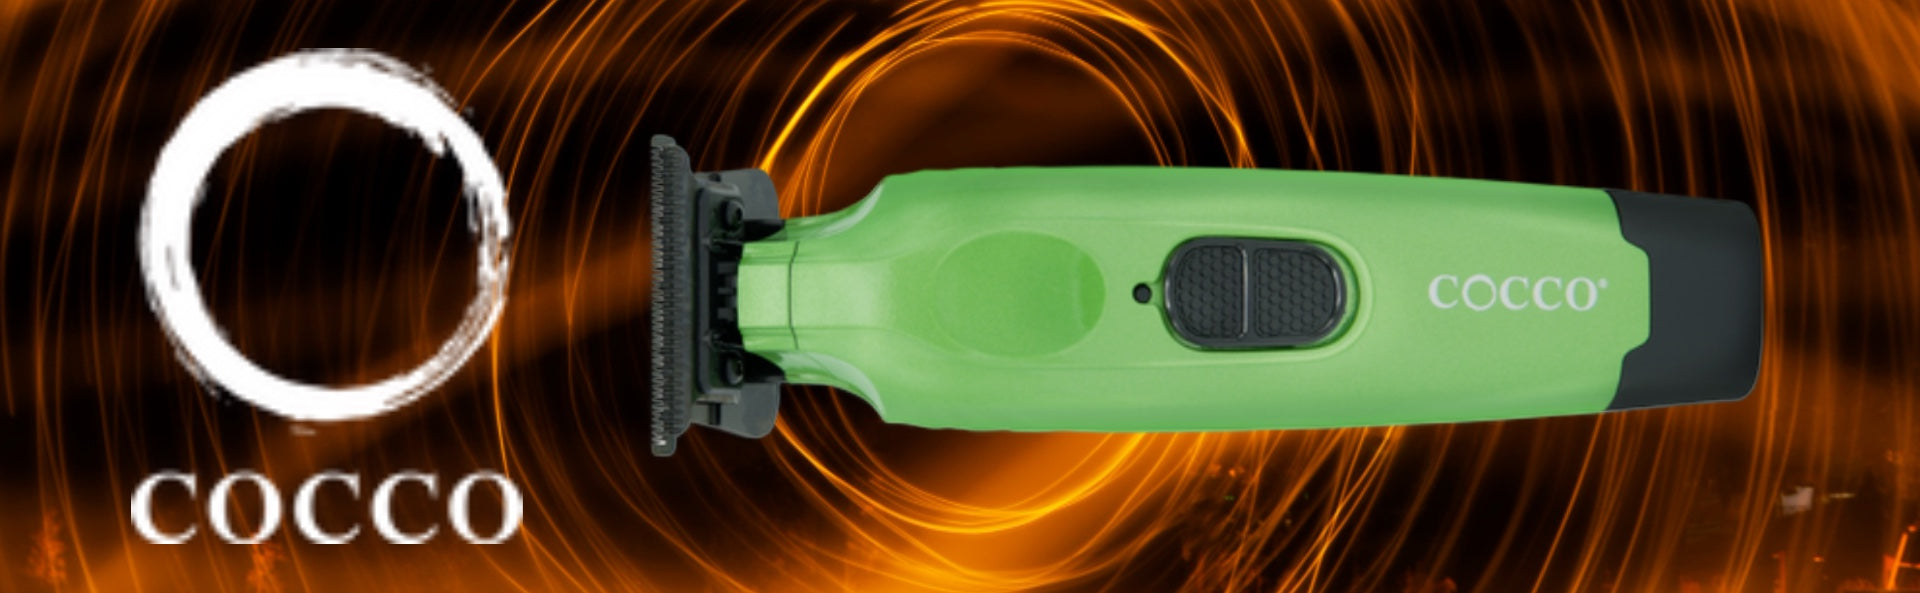 Cocco Hyper Veloce Pro Trimmer in Vibrant Green with High-Torque Motor and Precision DLC Blade